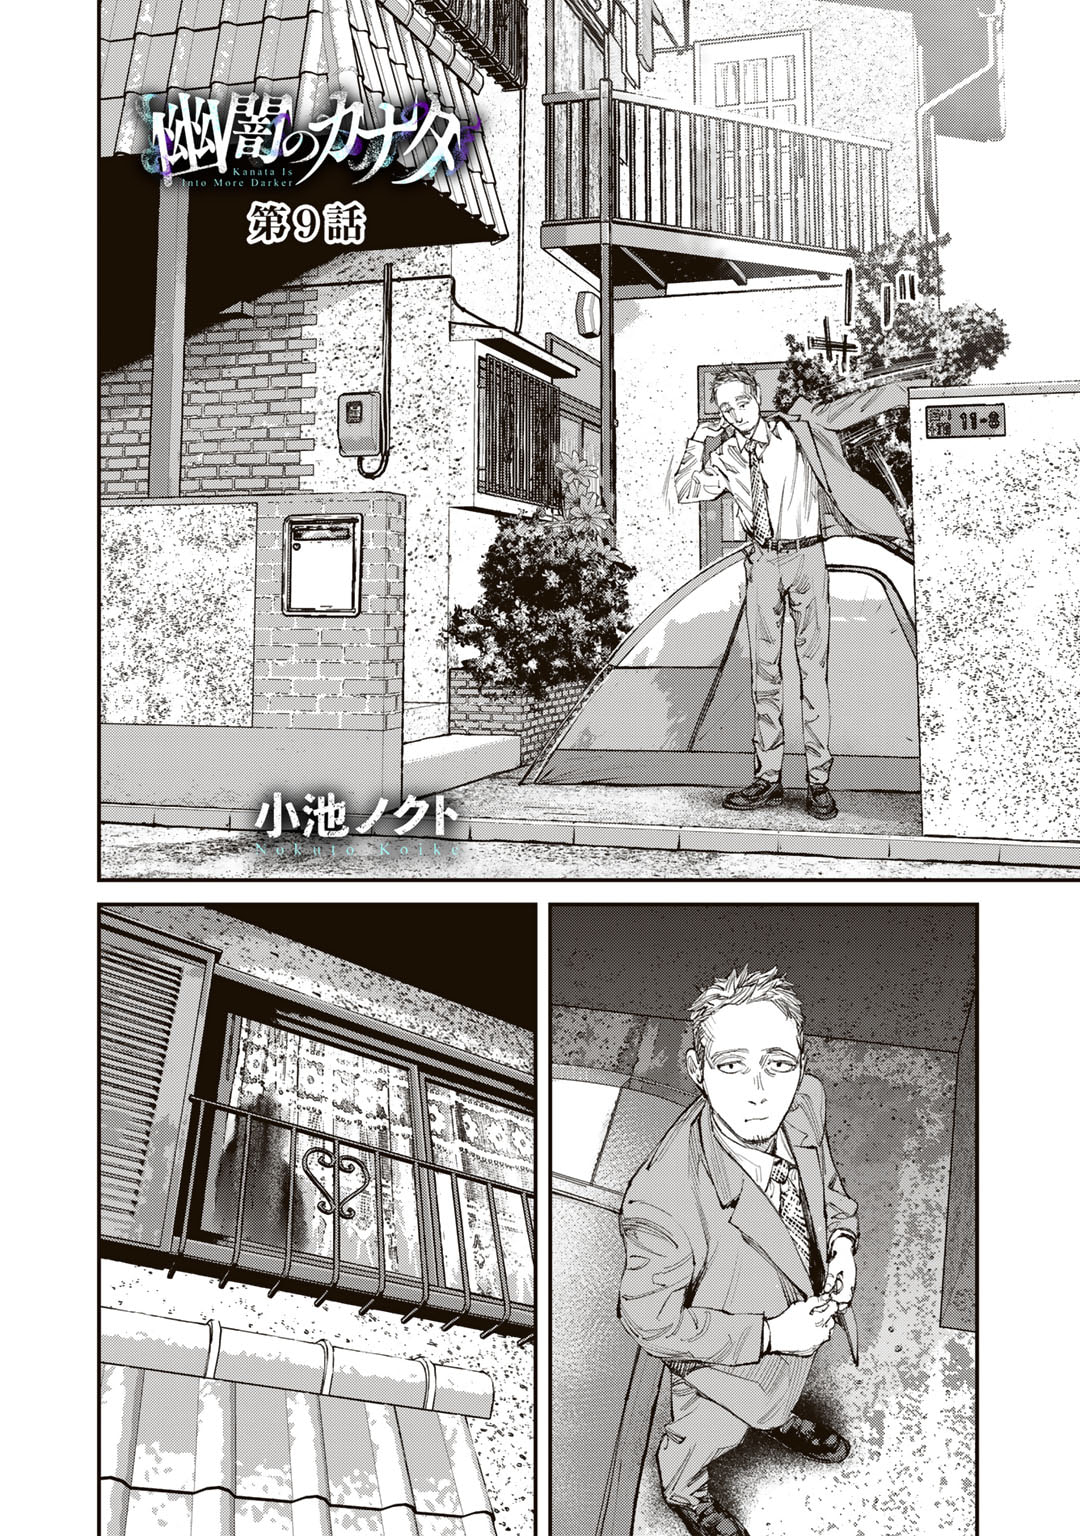 Kanata Is Into More Darker - Chapter 9 - Page 2